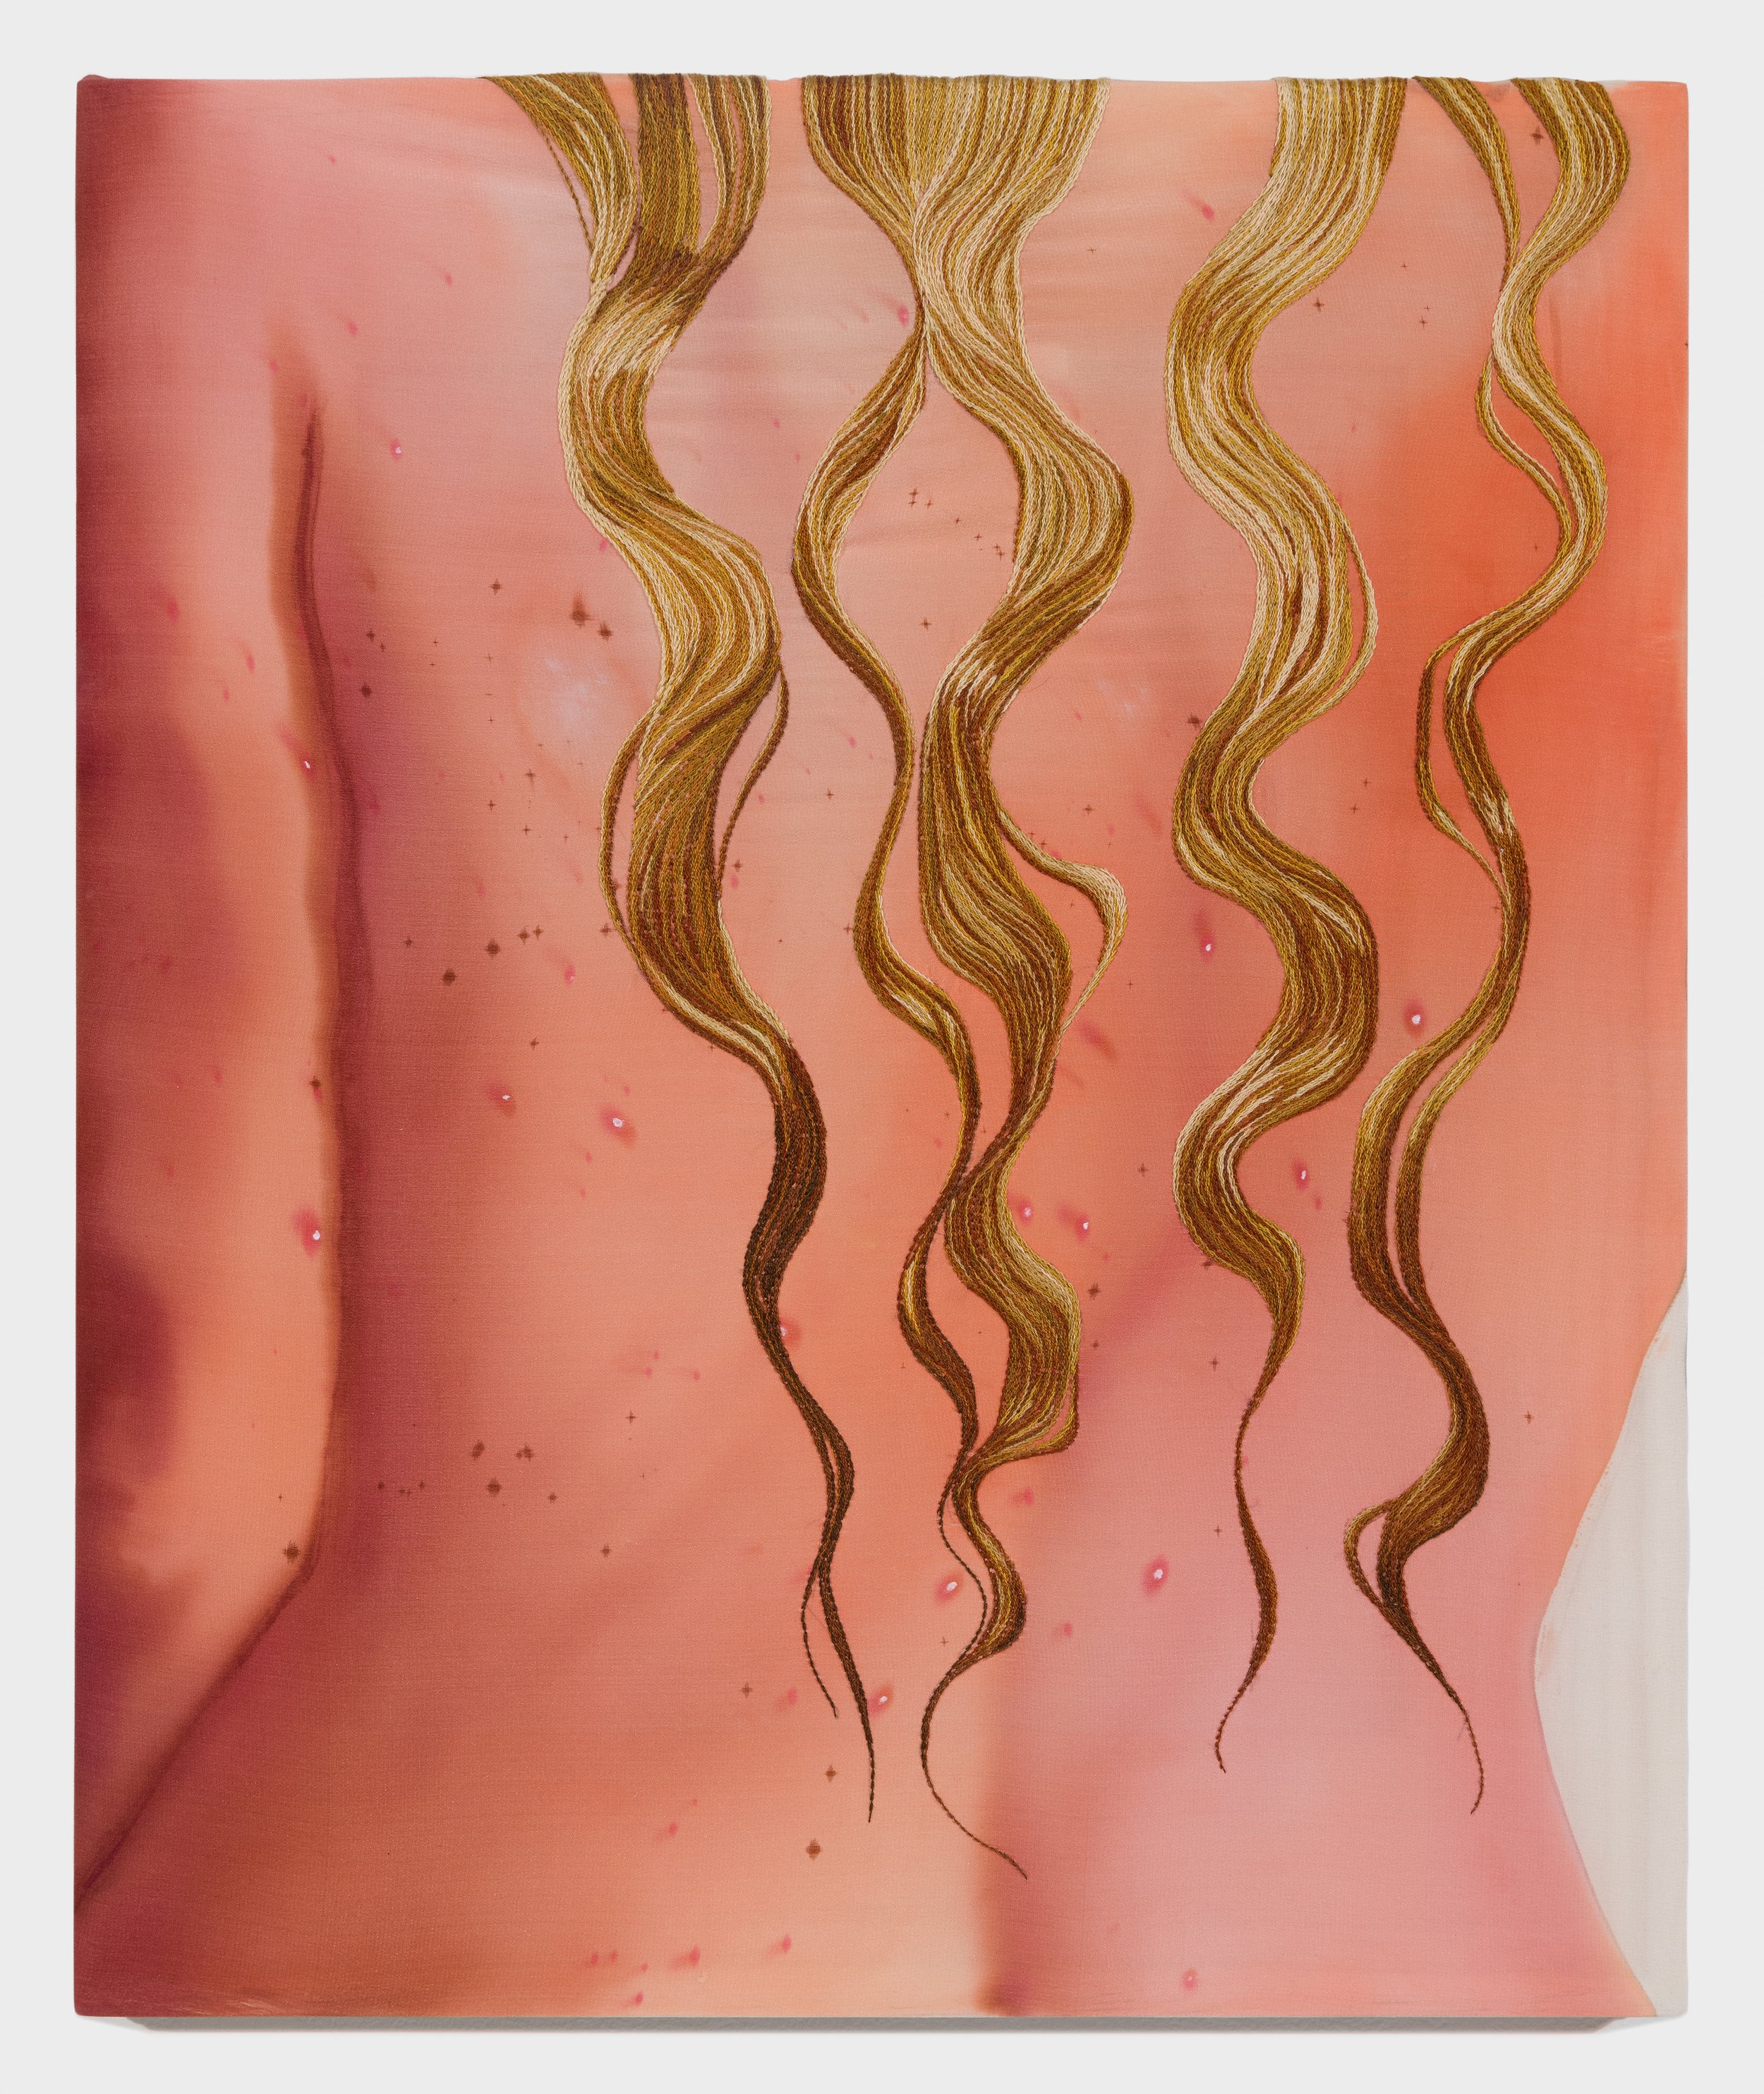  Katarina Riesing Bather, 2021 Dye on embroidery on Silke crepe de chine 18 x 14.5 inches / 45.72 x 36.83 cm 